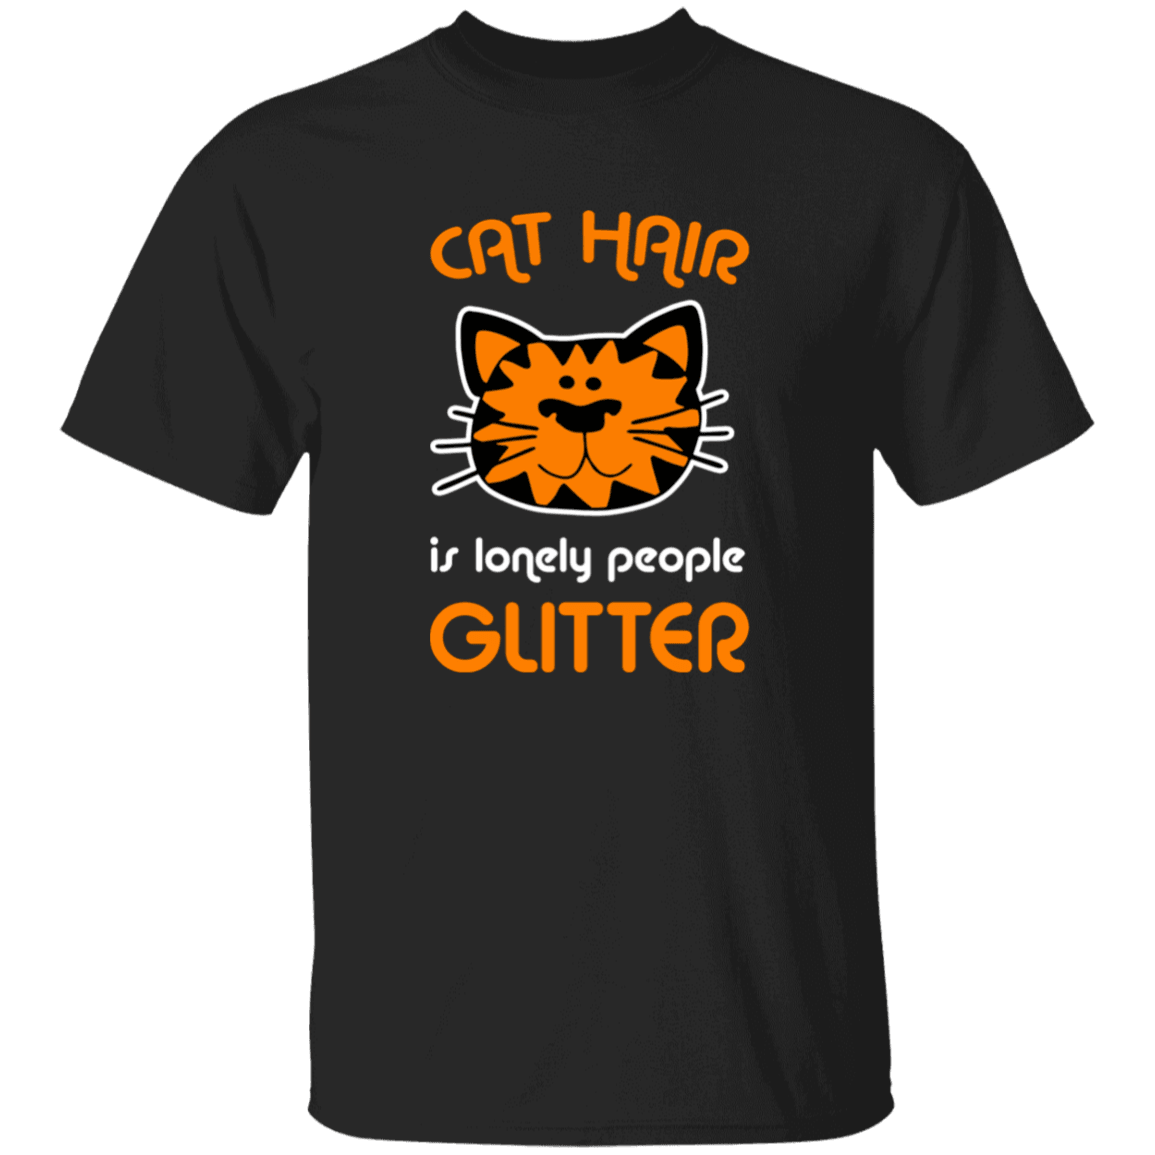 Designs by MyUtopia Shout Out:Cat Hair is Lonly People Glitter 100% cotton Unisex T-Shirt Special Offer,Black / S,Adult Unisex T-Shirt